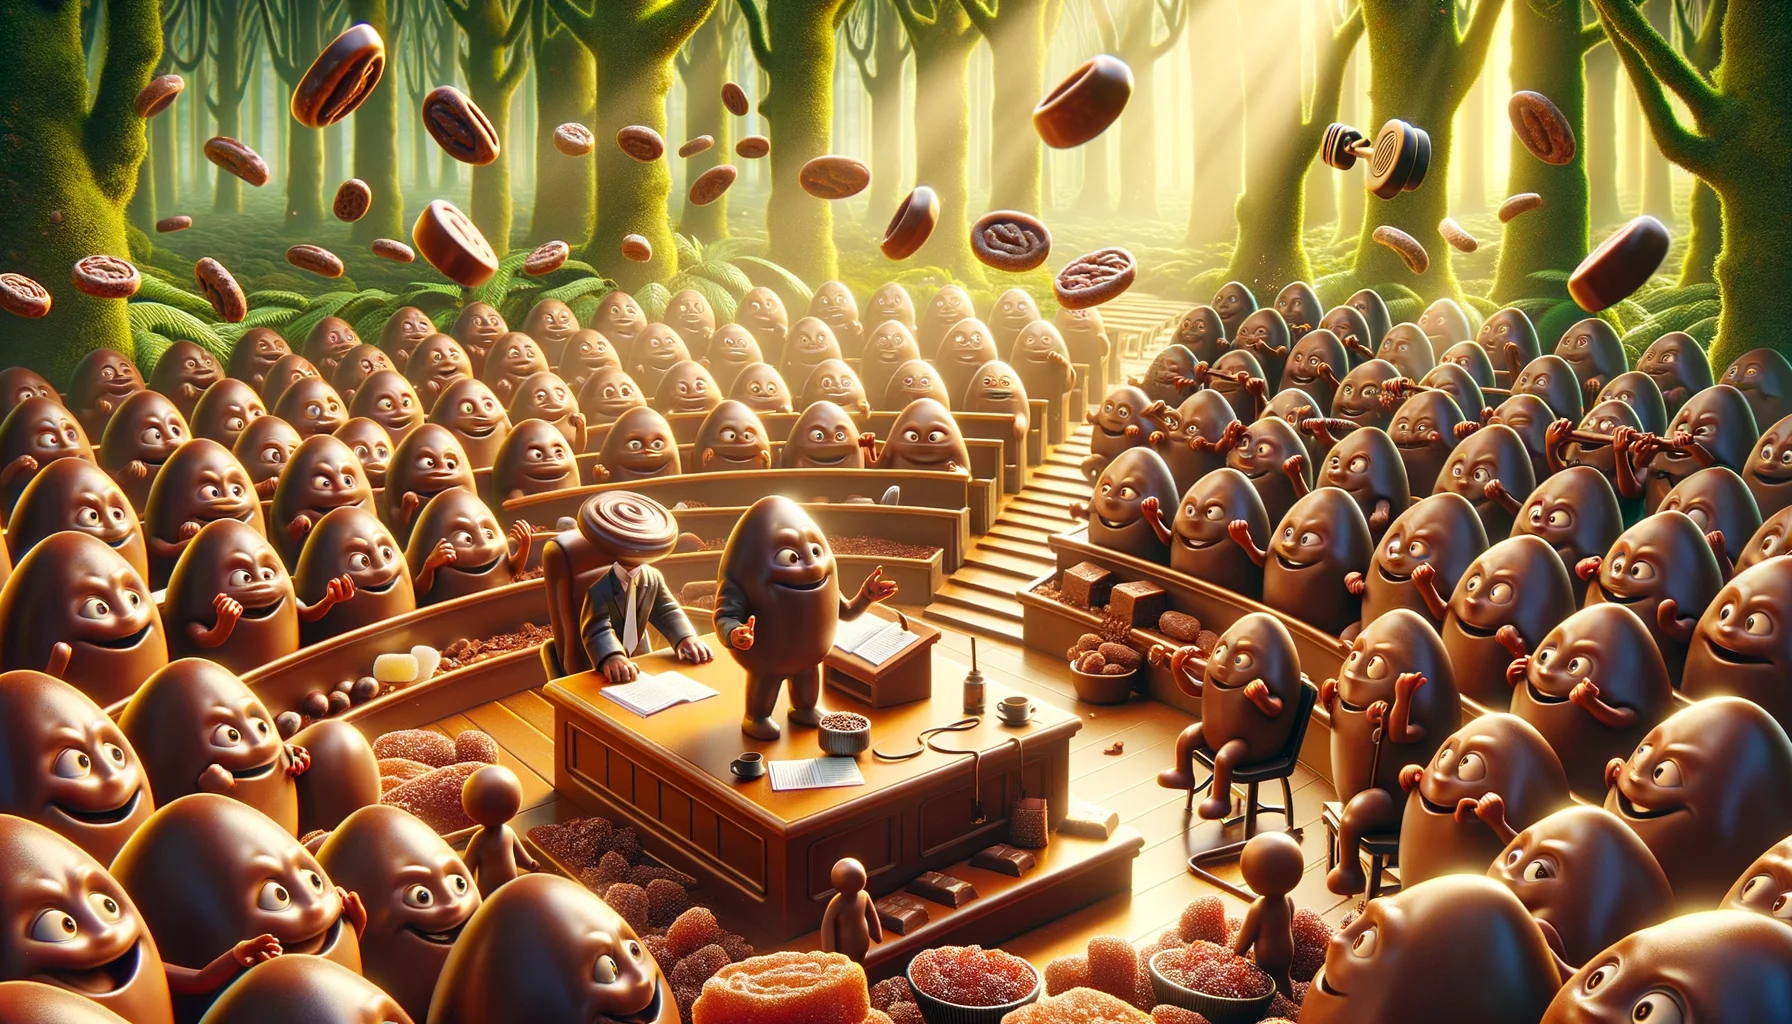 Imagine an exceptionally humorous, realistic image, showcasing a scene where a group of 'Sugar-Free Chocolates' are in perfect harmony in their scenario. These chocolates are amusingly living their own lives, perhaps conducting a meeting in a mini chocolate parliament, wearing tiny suits. Some could be joyfully exercising in a little chocolate gym, lifting tiny raisins as weights, depicting their healthier nature. The background is flooded with luscious cocoa trees, and pristine sugar crystals replaced with sweetener substitutes. The scene is bathed in the warm, inviting glow of soft sunlight, creating a perfect, utopian world for these 'Sugar-Free Chocolates'.